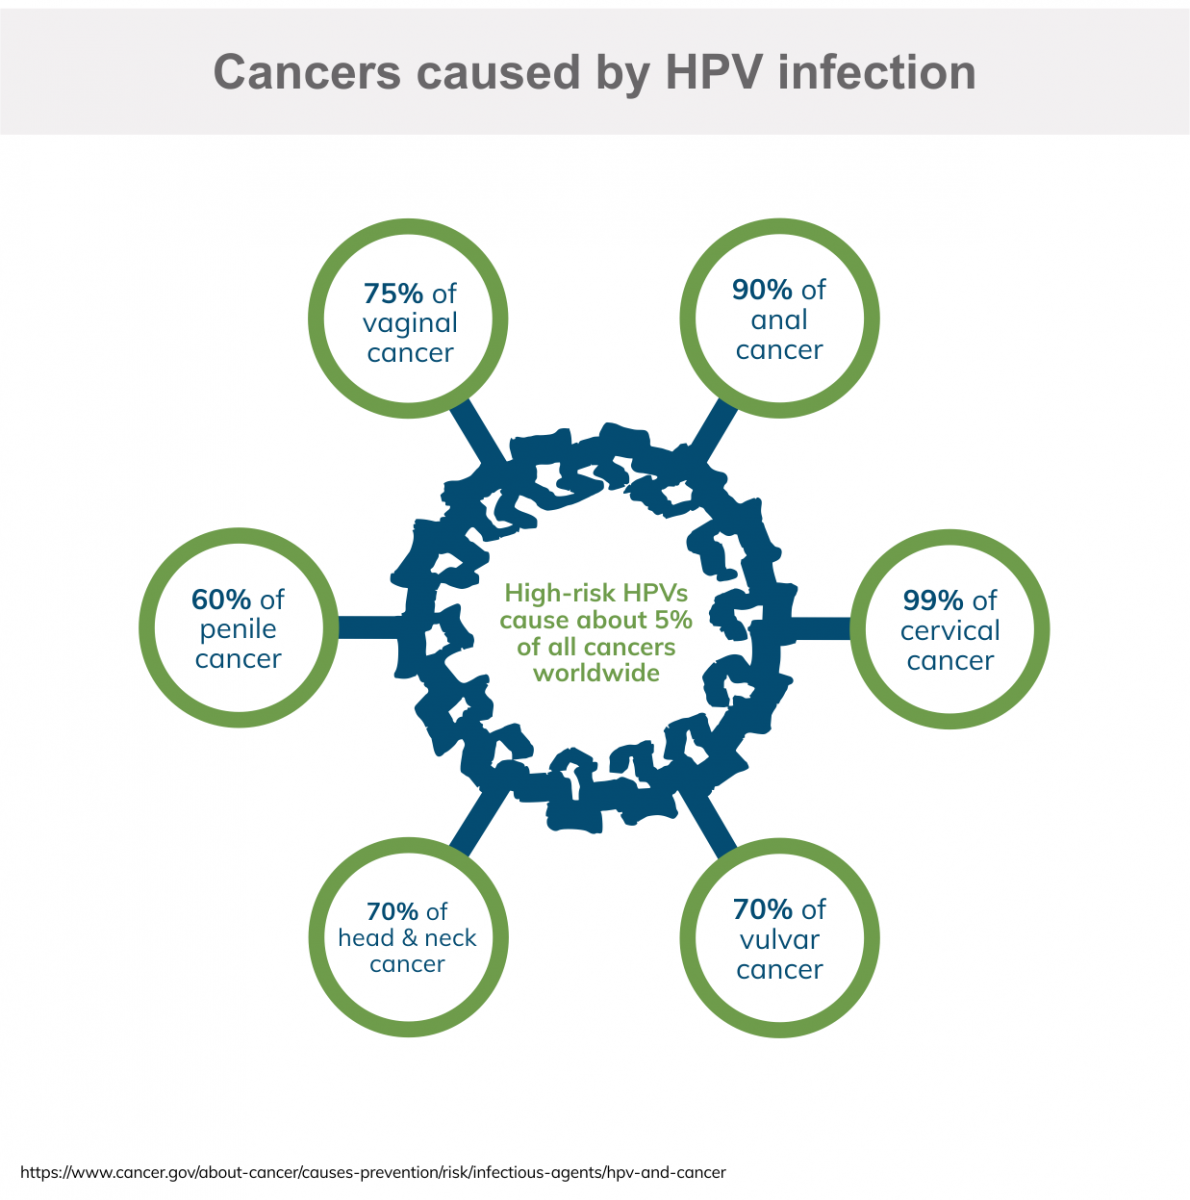 do all hpv cause cancer